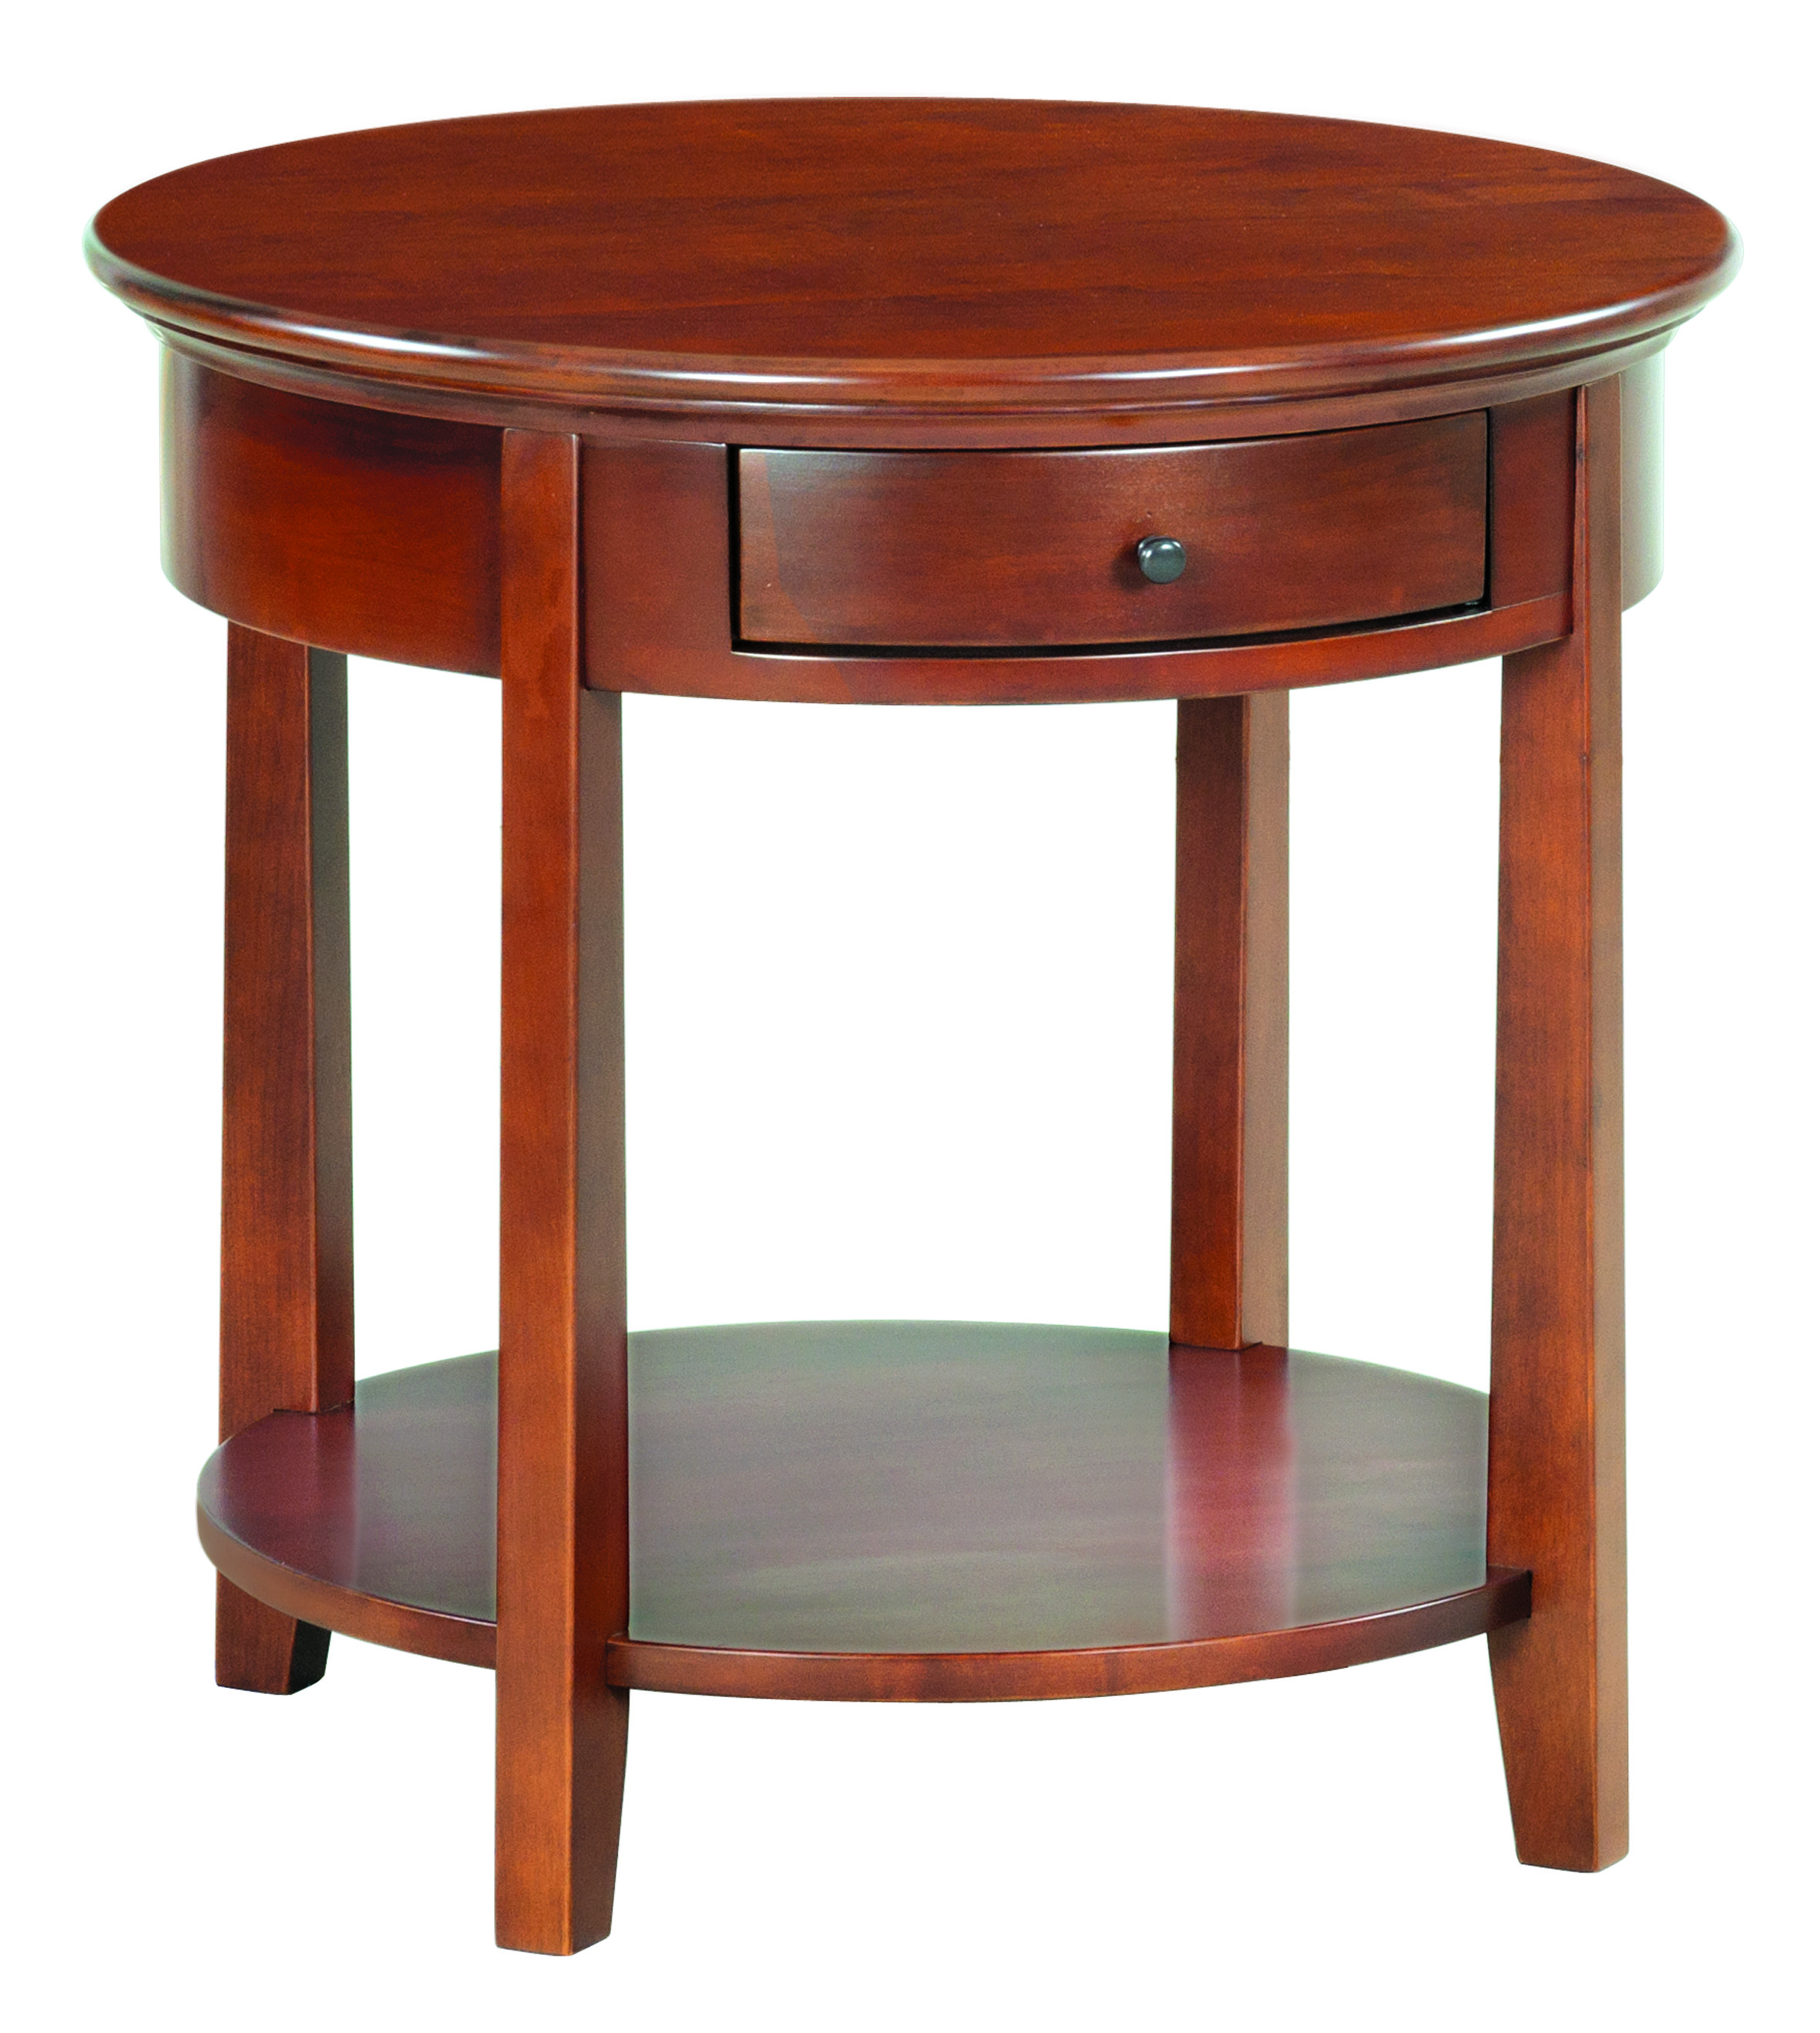 3510 Mckenzie Large Round End Table, Large Round End Table With Drawer